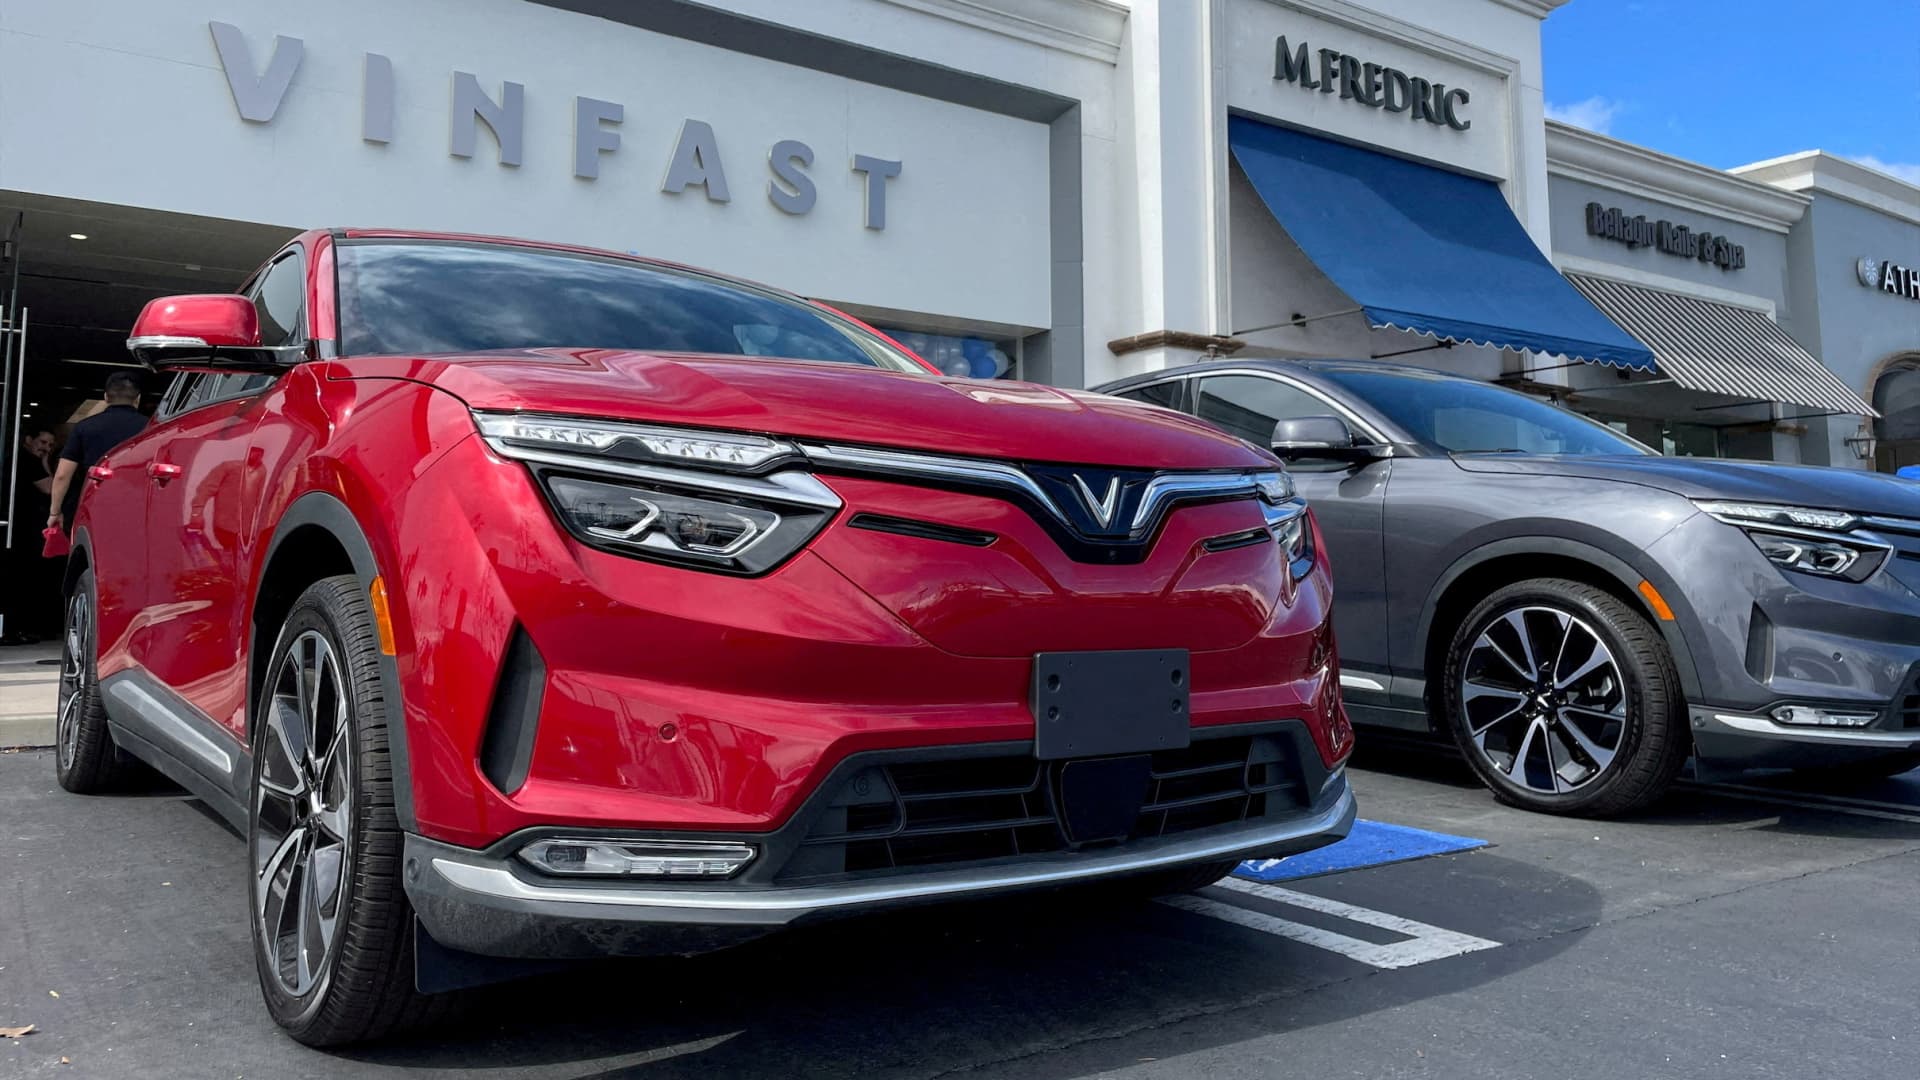 VinFast aims to sell up to 50,000 EVs in 2023 — but it’s far from its target